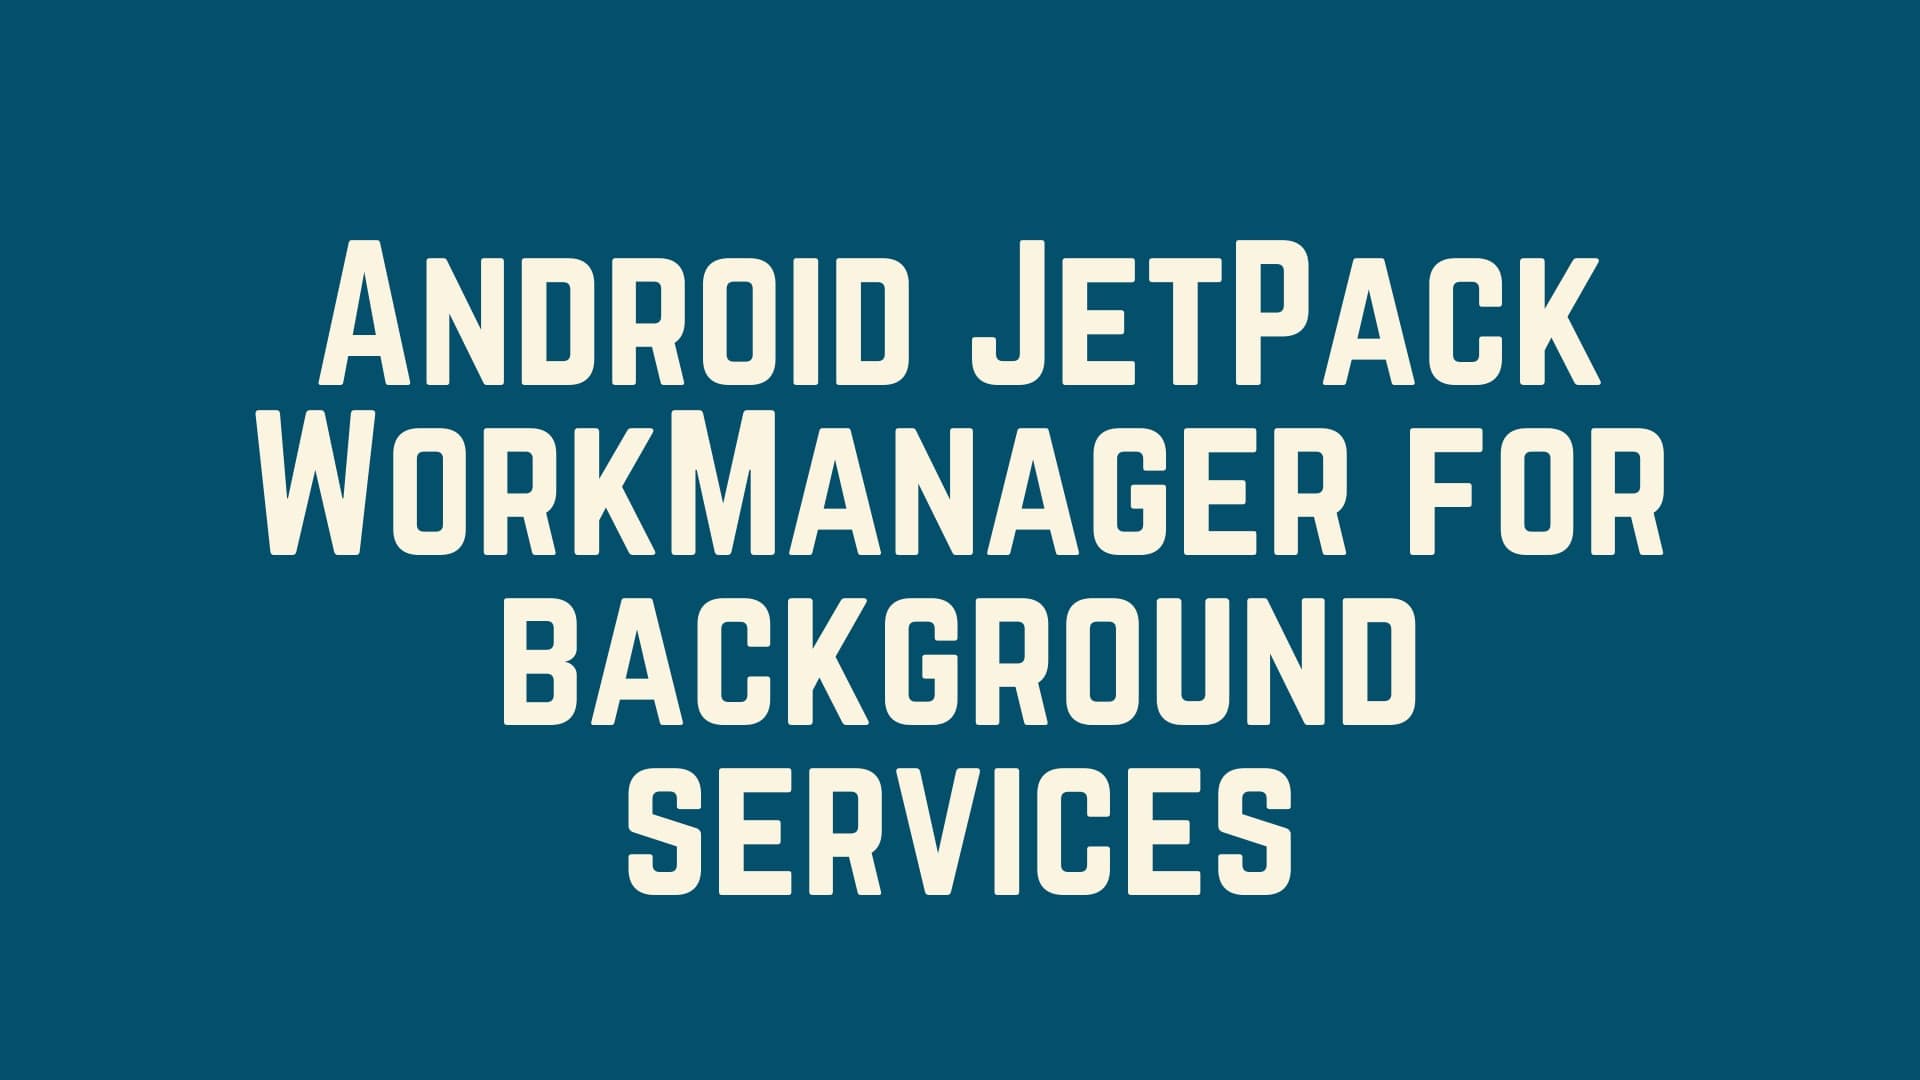 Android JetPack WorkManager for background services